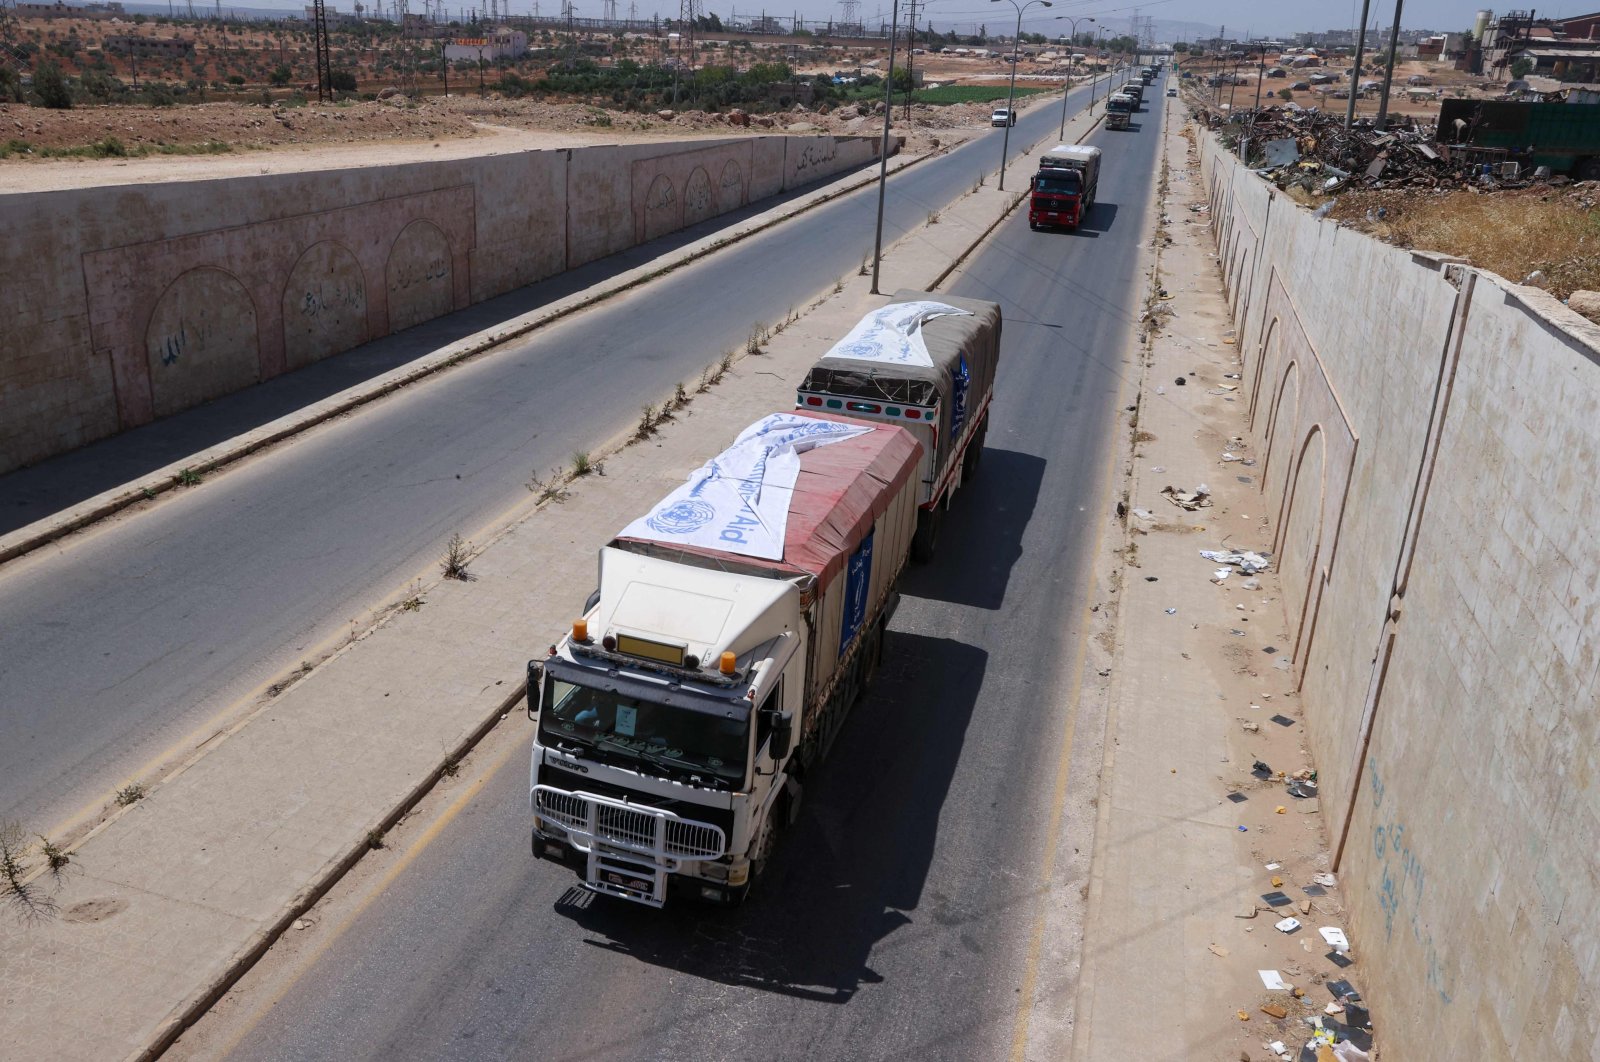 Trucks carrying aid packages from the World Food Program (WFP) drive through the town of Saraqib in the northwestern Idlib province on June 12, 2022. (Photo by OMAR HAJ KADOUR / AFP)